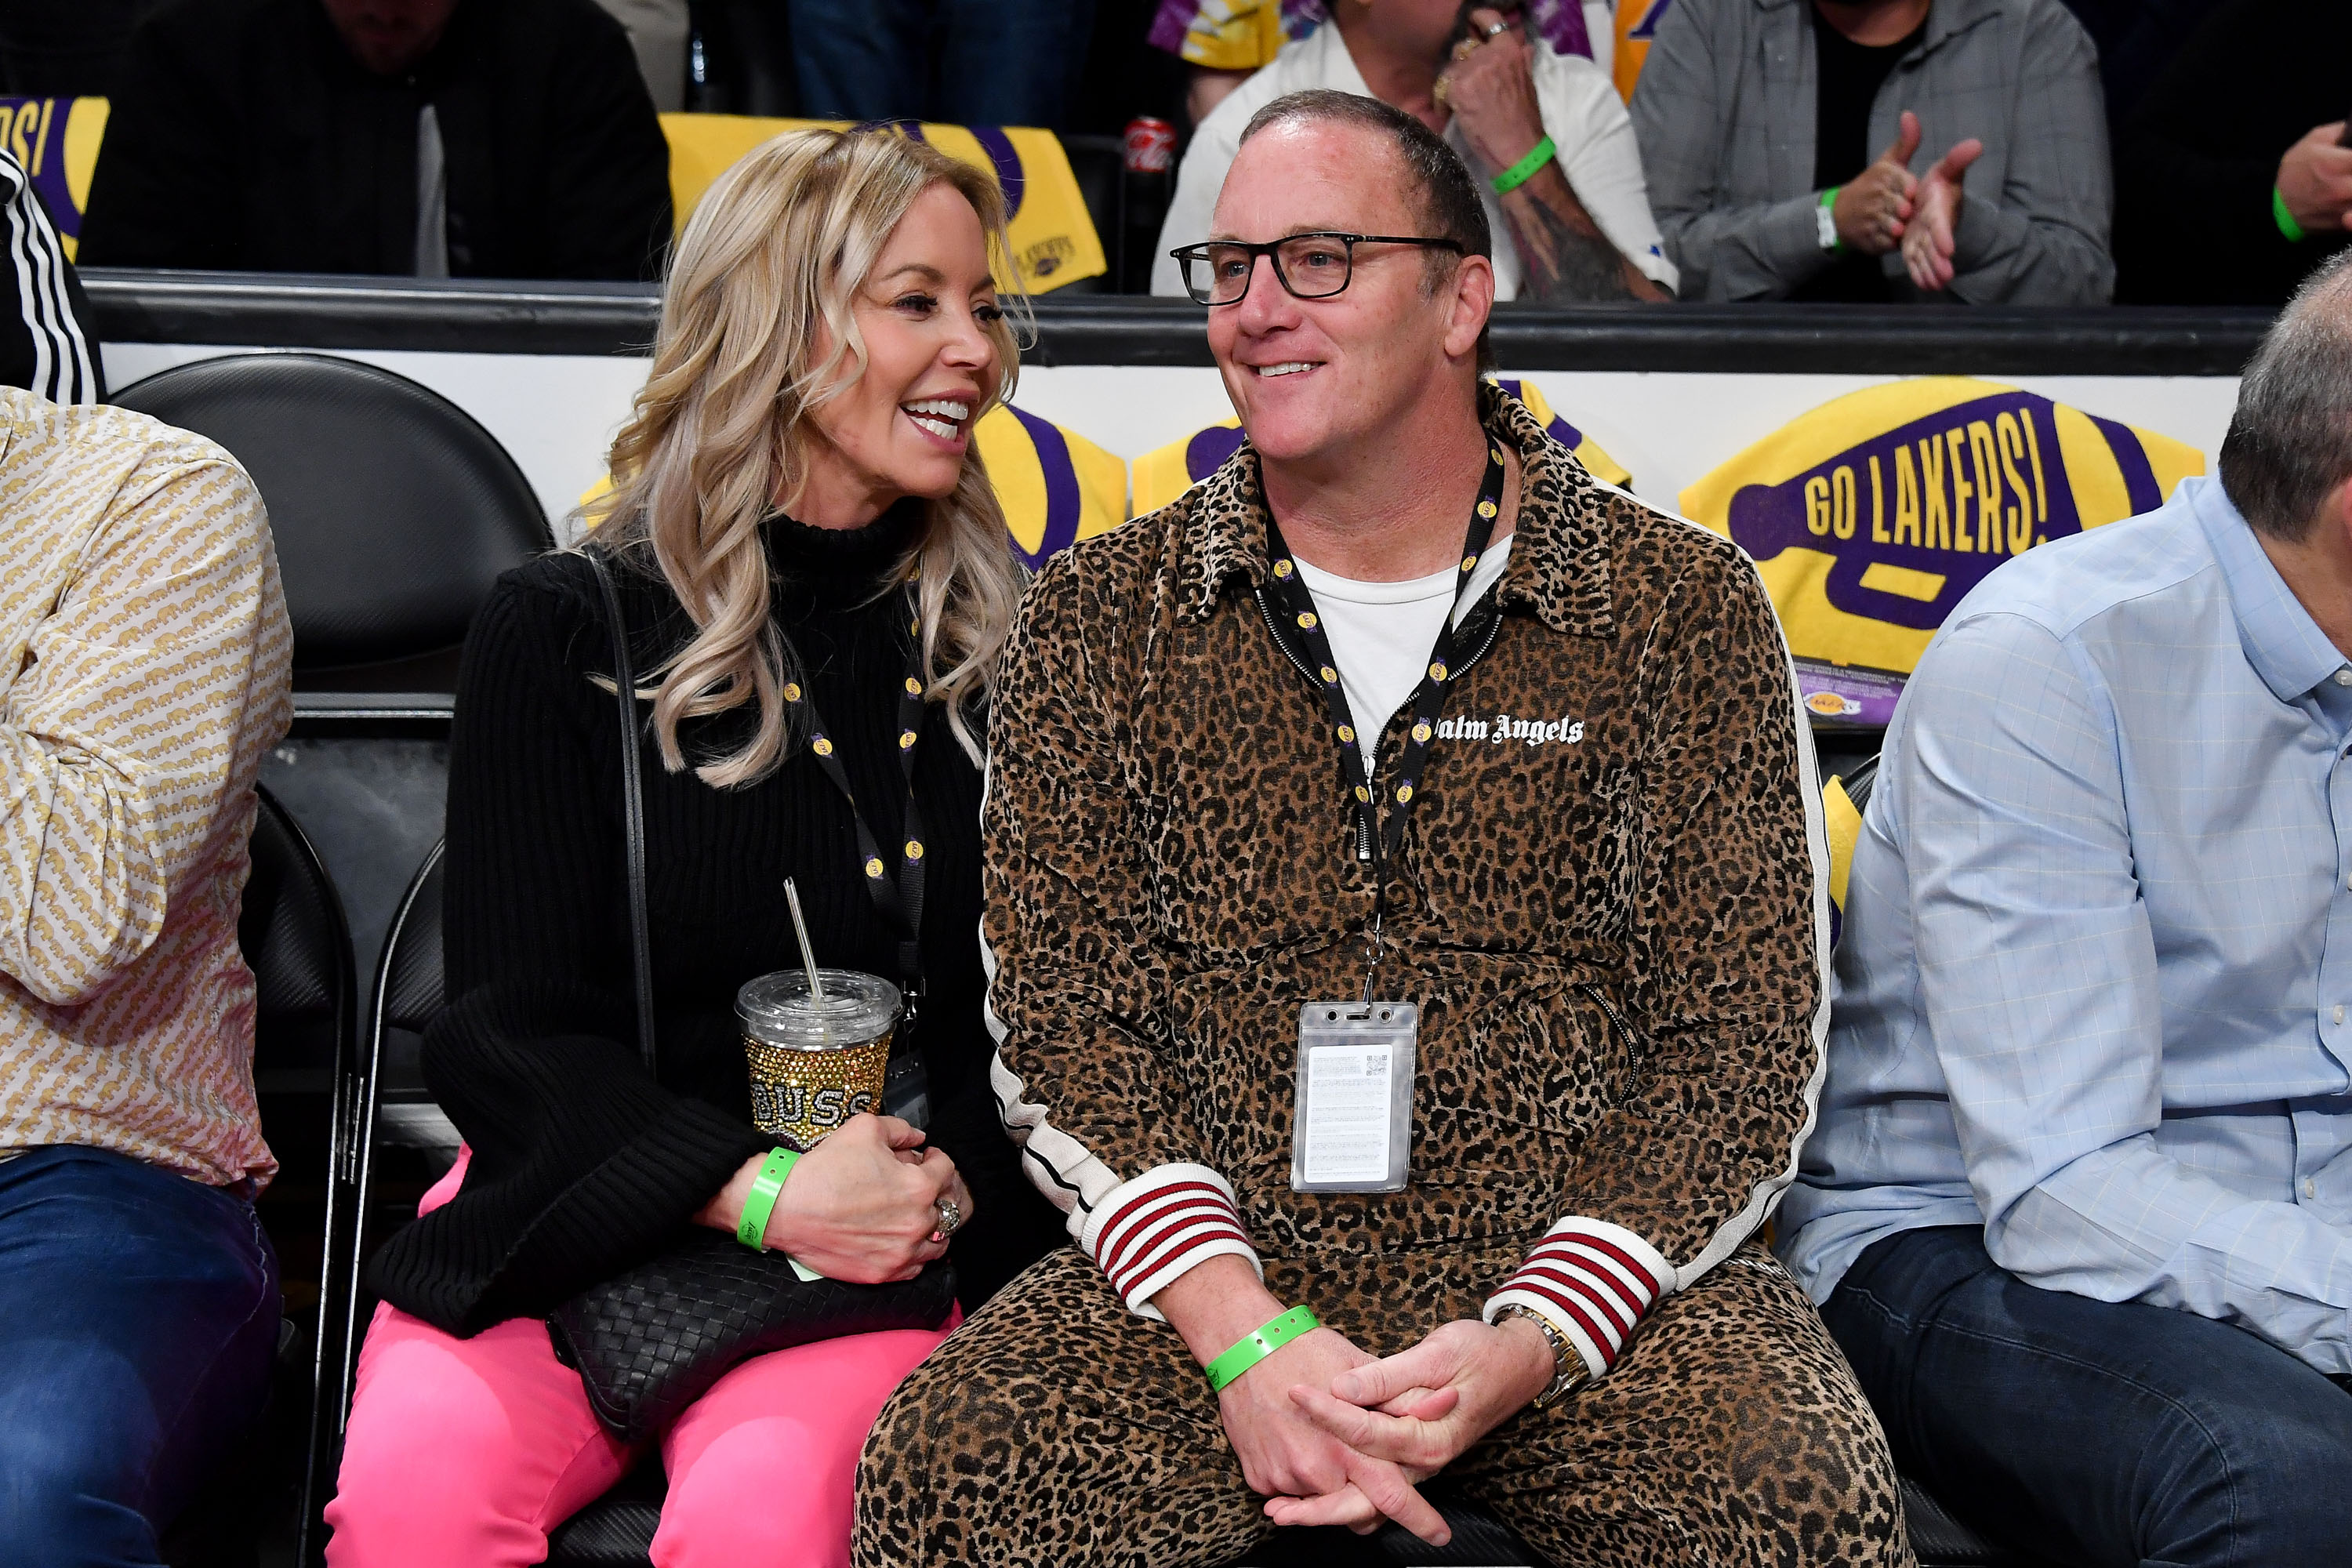 Jeanie Buss and Jay Mohr attend a playoff basketball game between the Los Angeles Lakers and the Golden State Warriors.